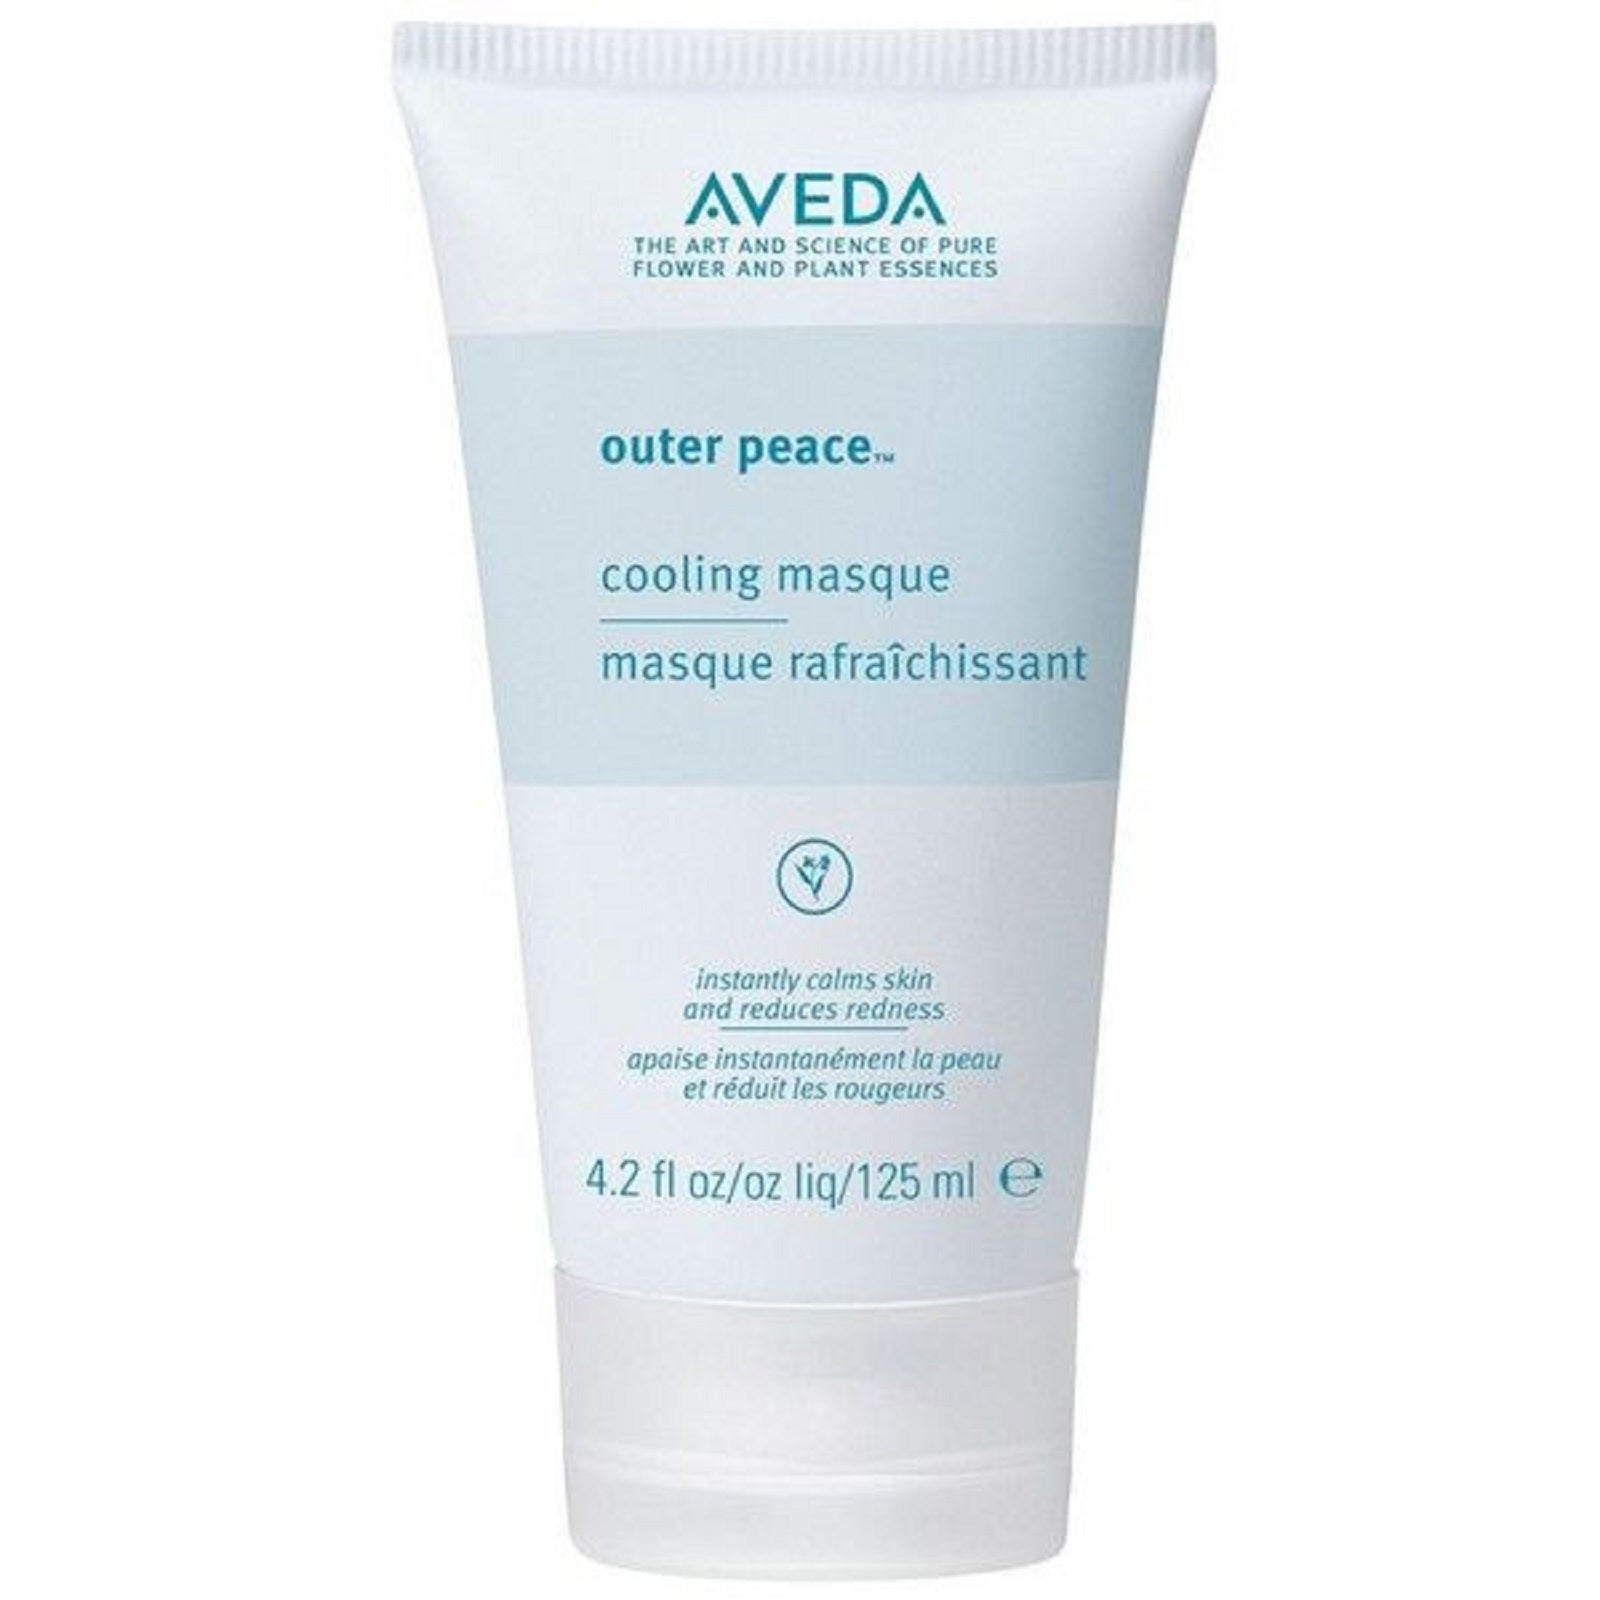 AVEDA Outer Peace Cooling Masque 125ml 4.2oz (acne)